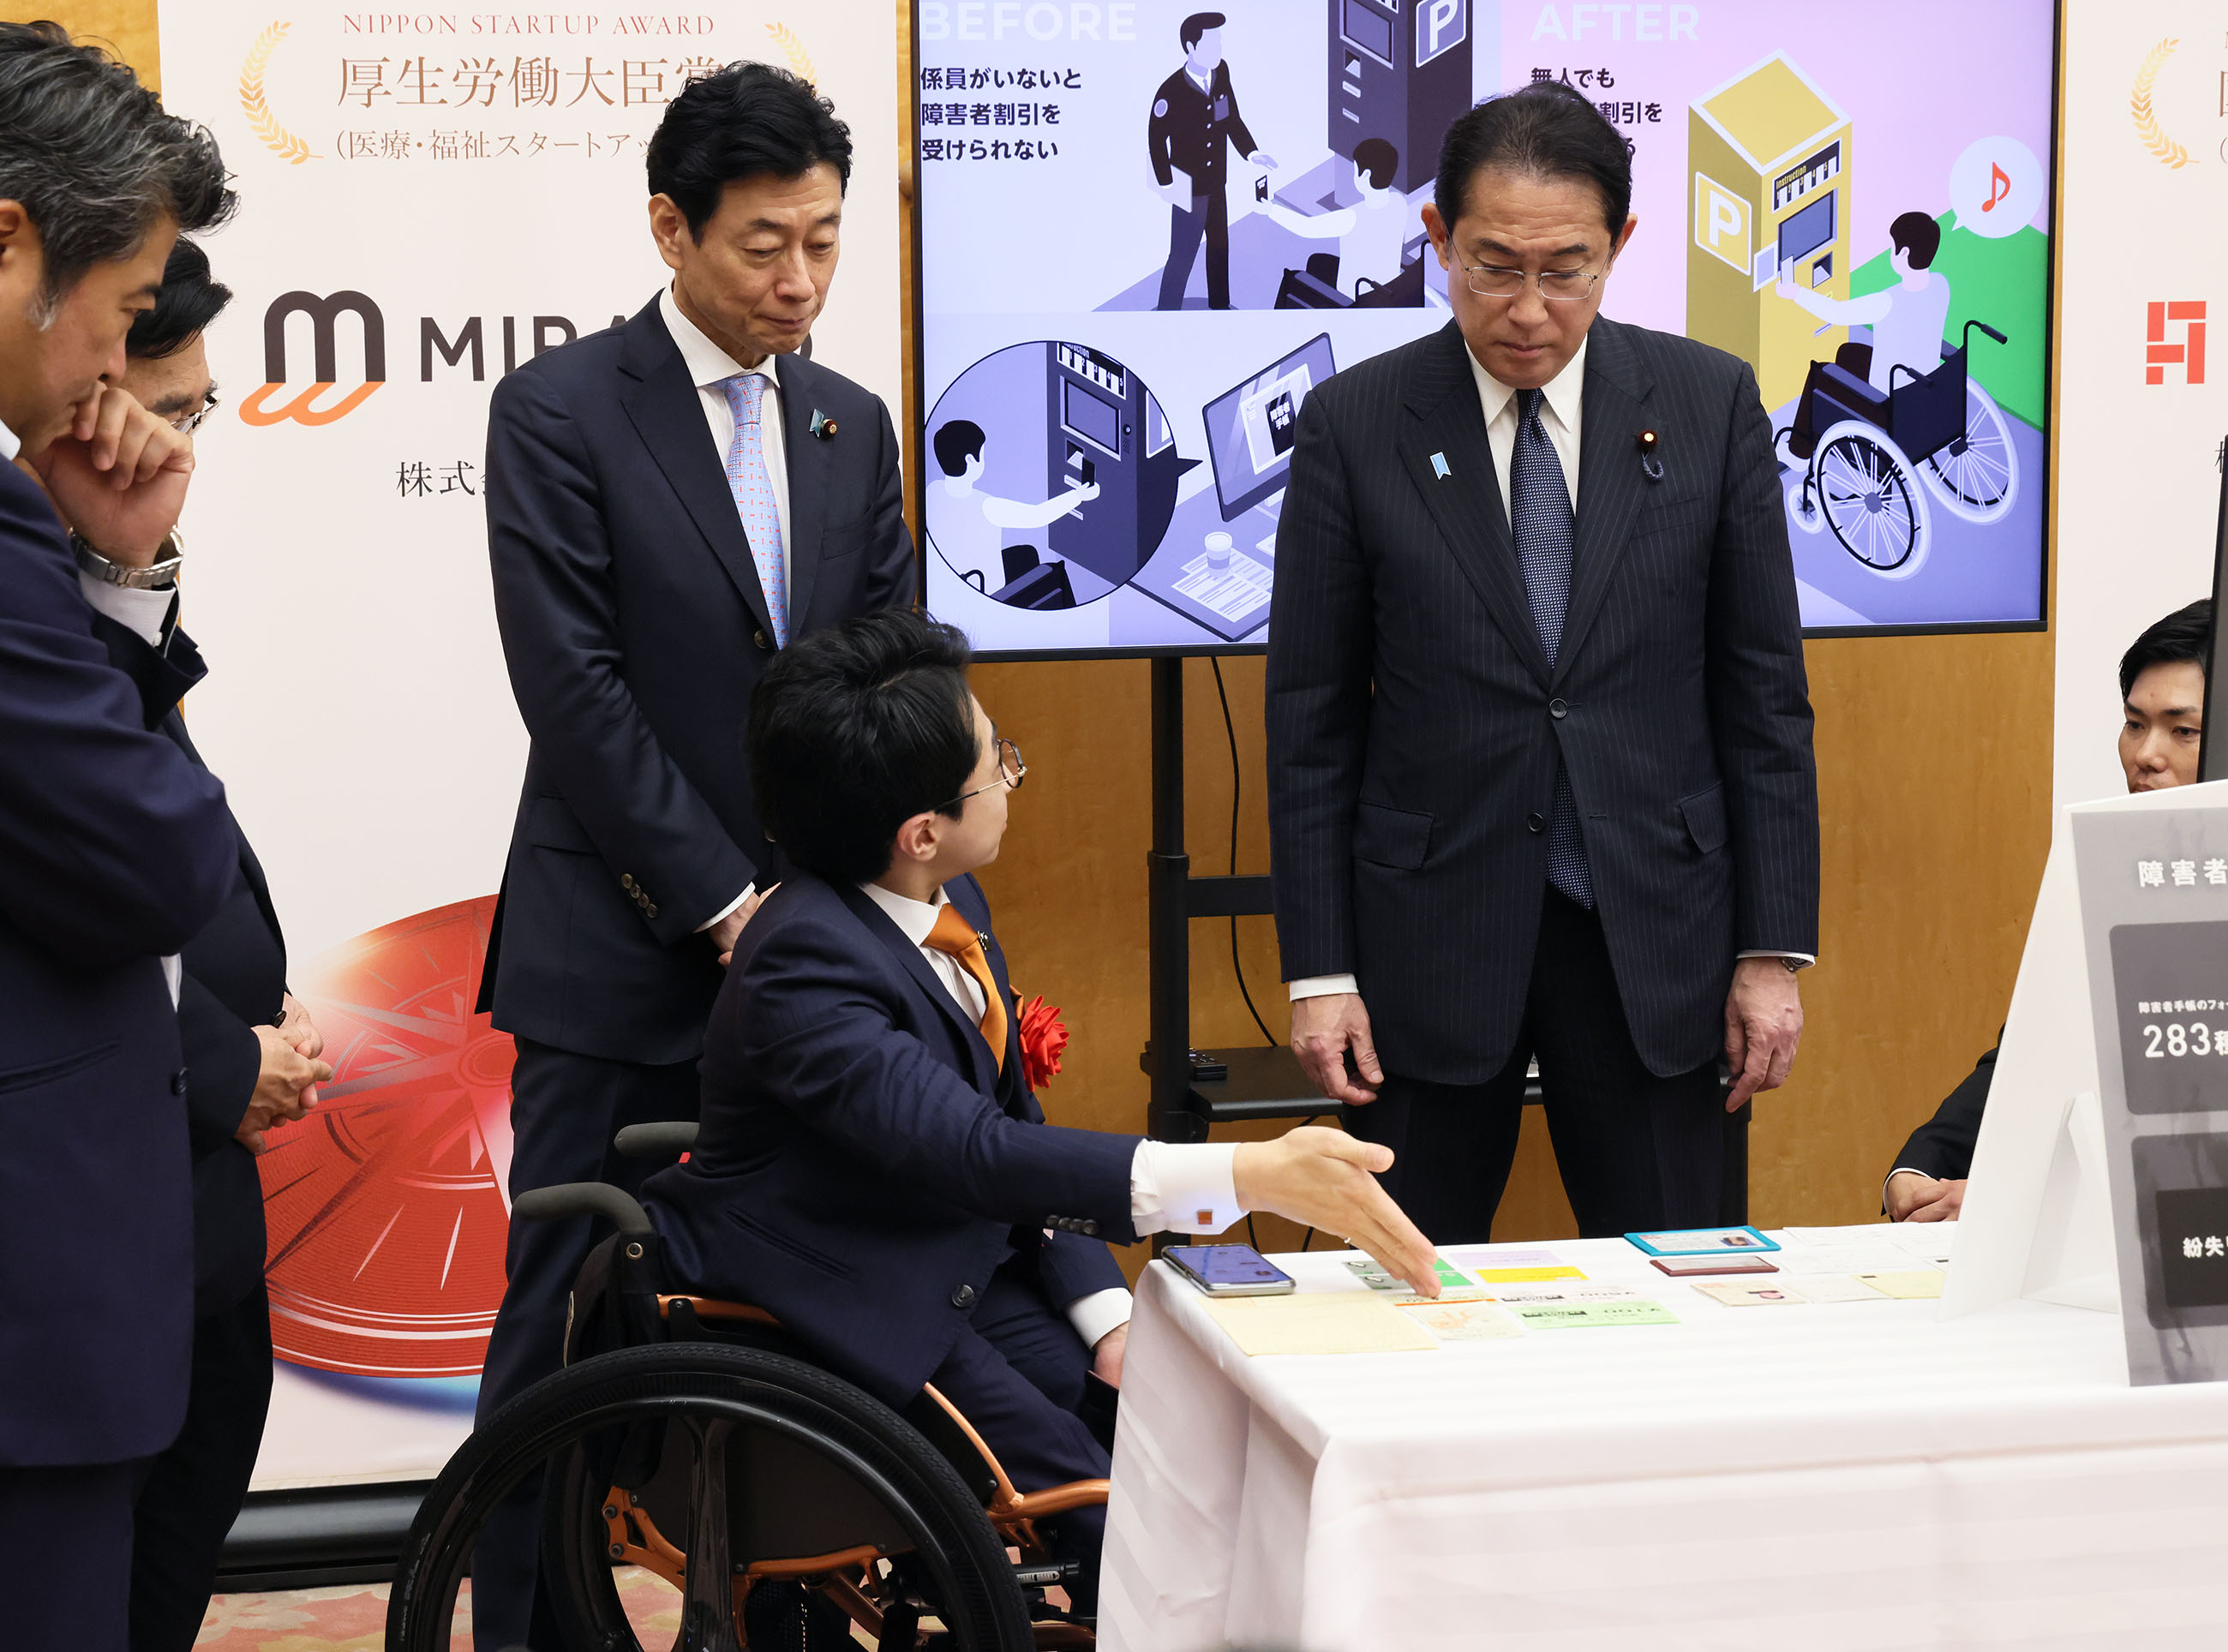 Prime Minister Kishida viewing the exhibition booth of award winners (6)